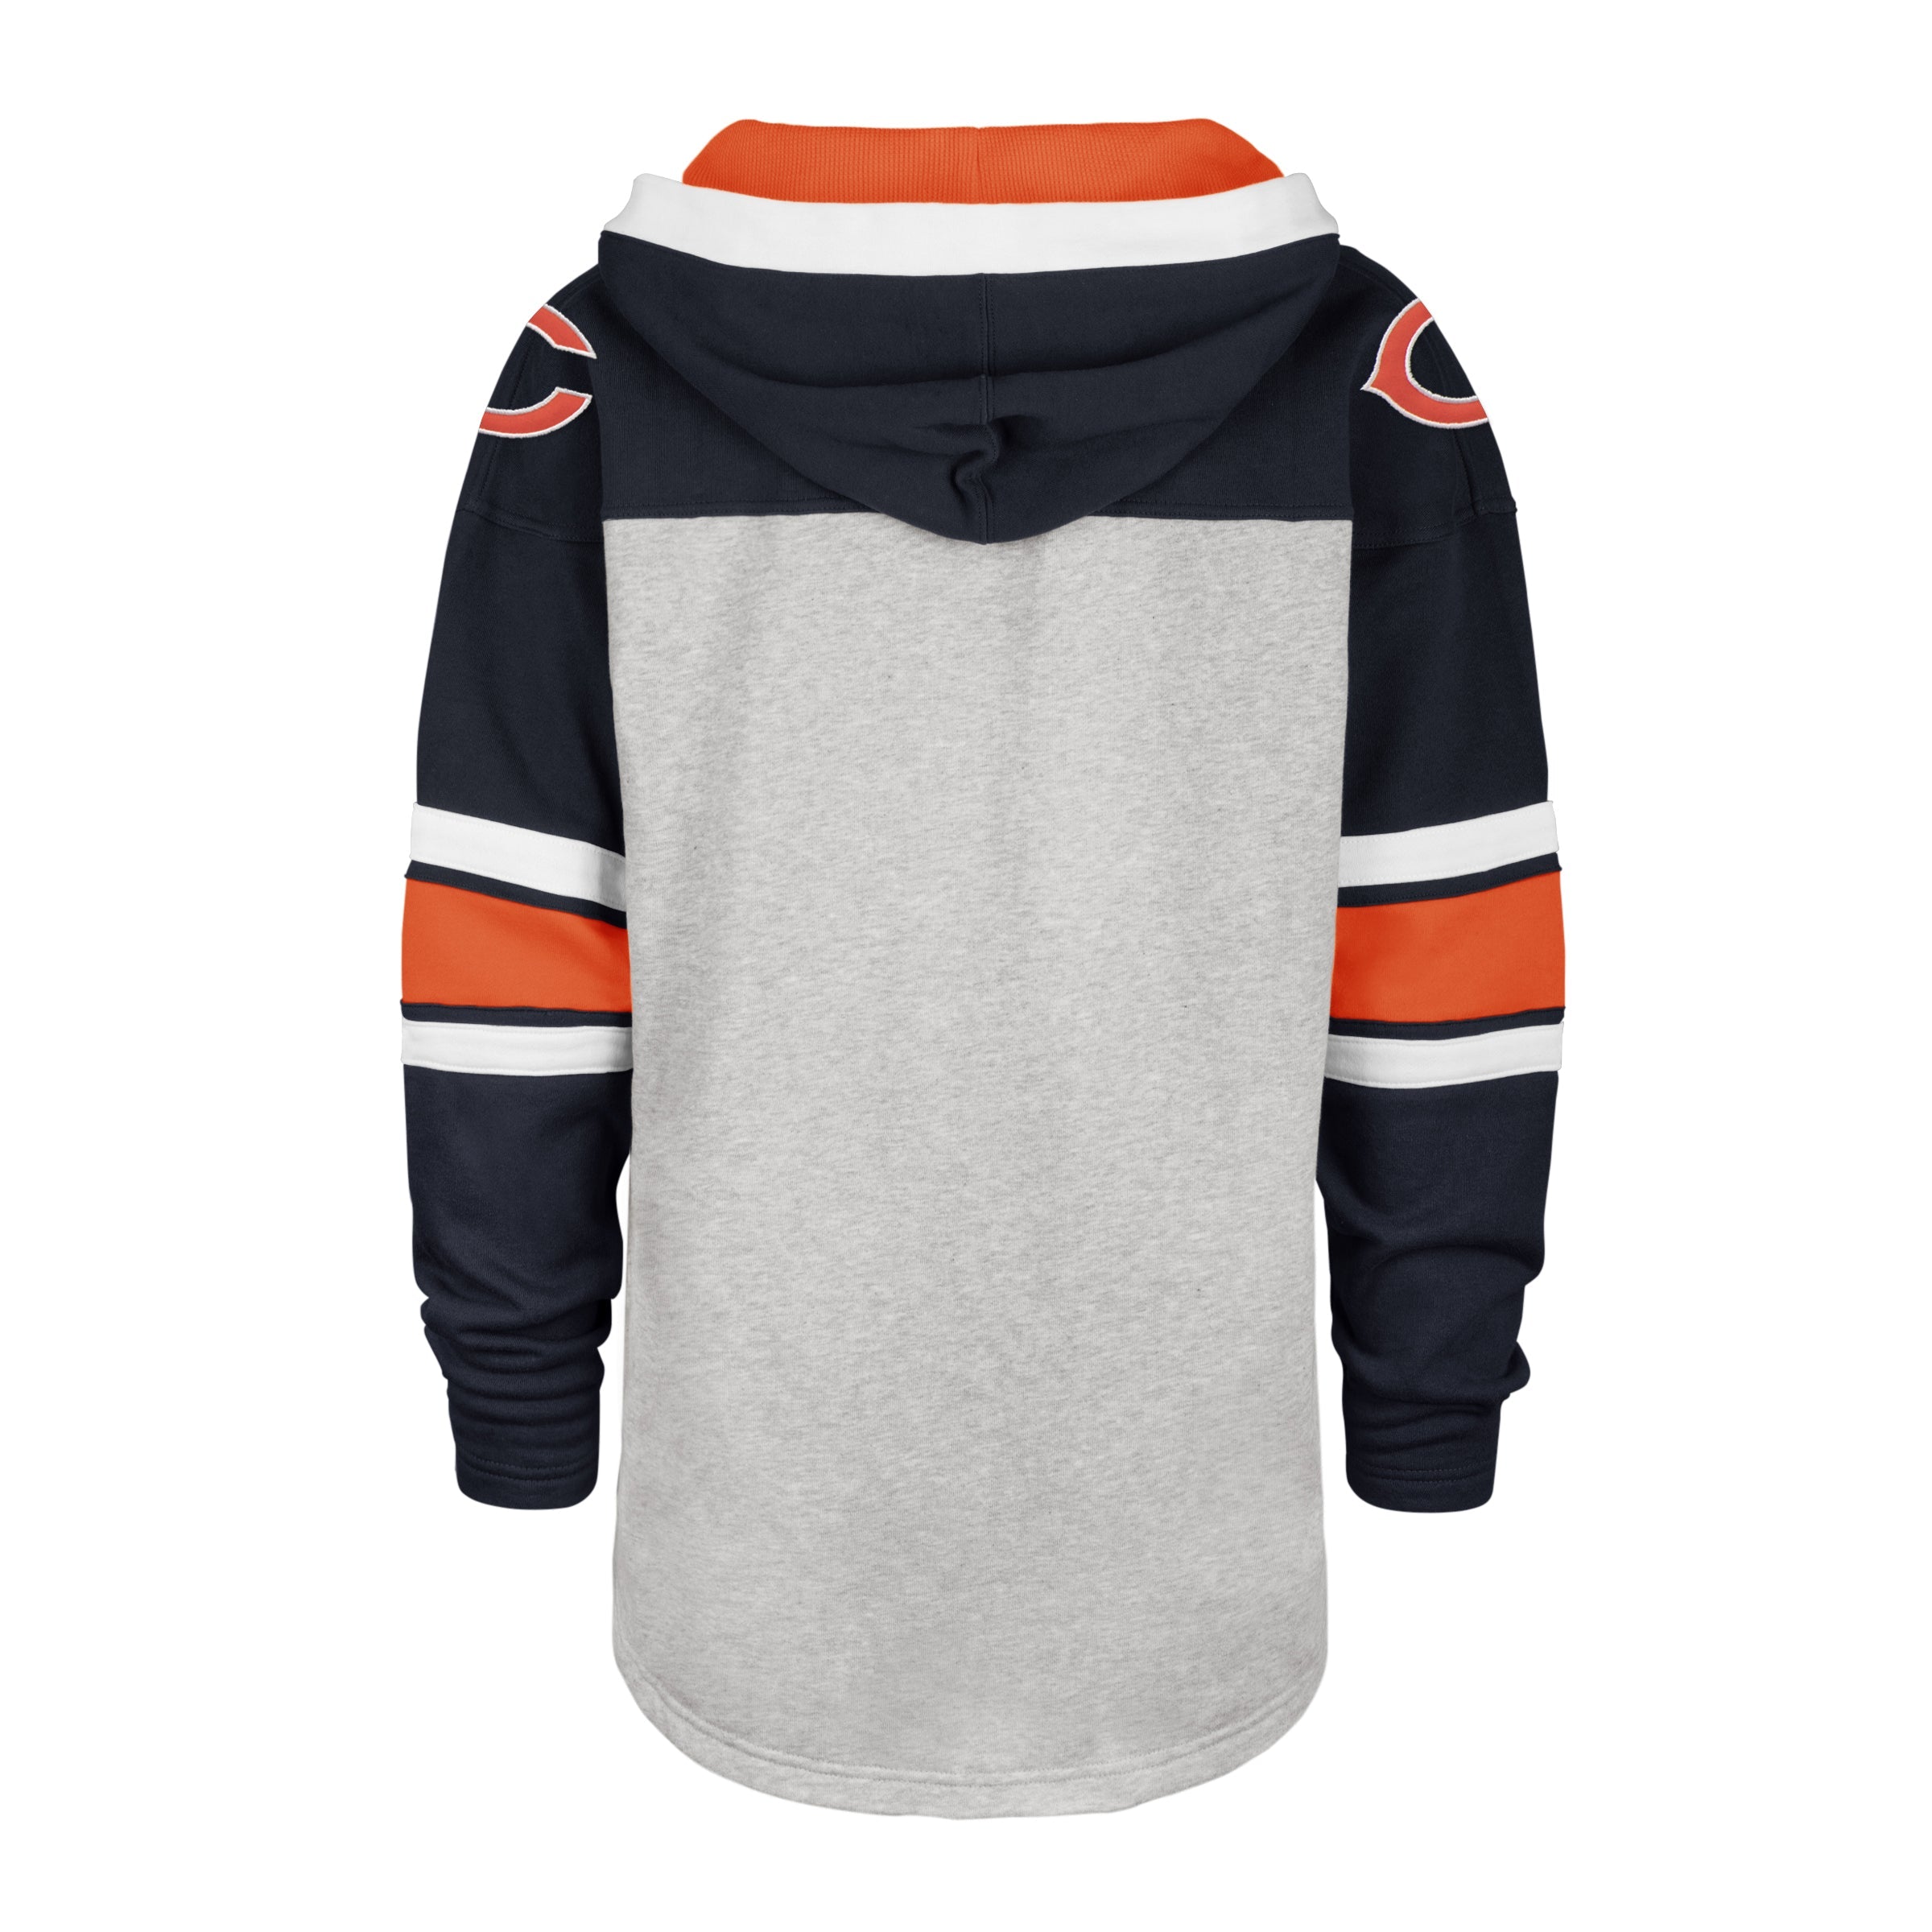 Chicago Bears '47 Gridiron Lace Up Hoodie